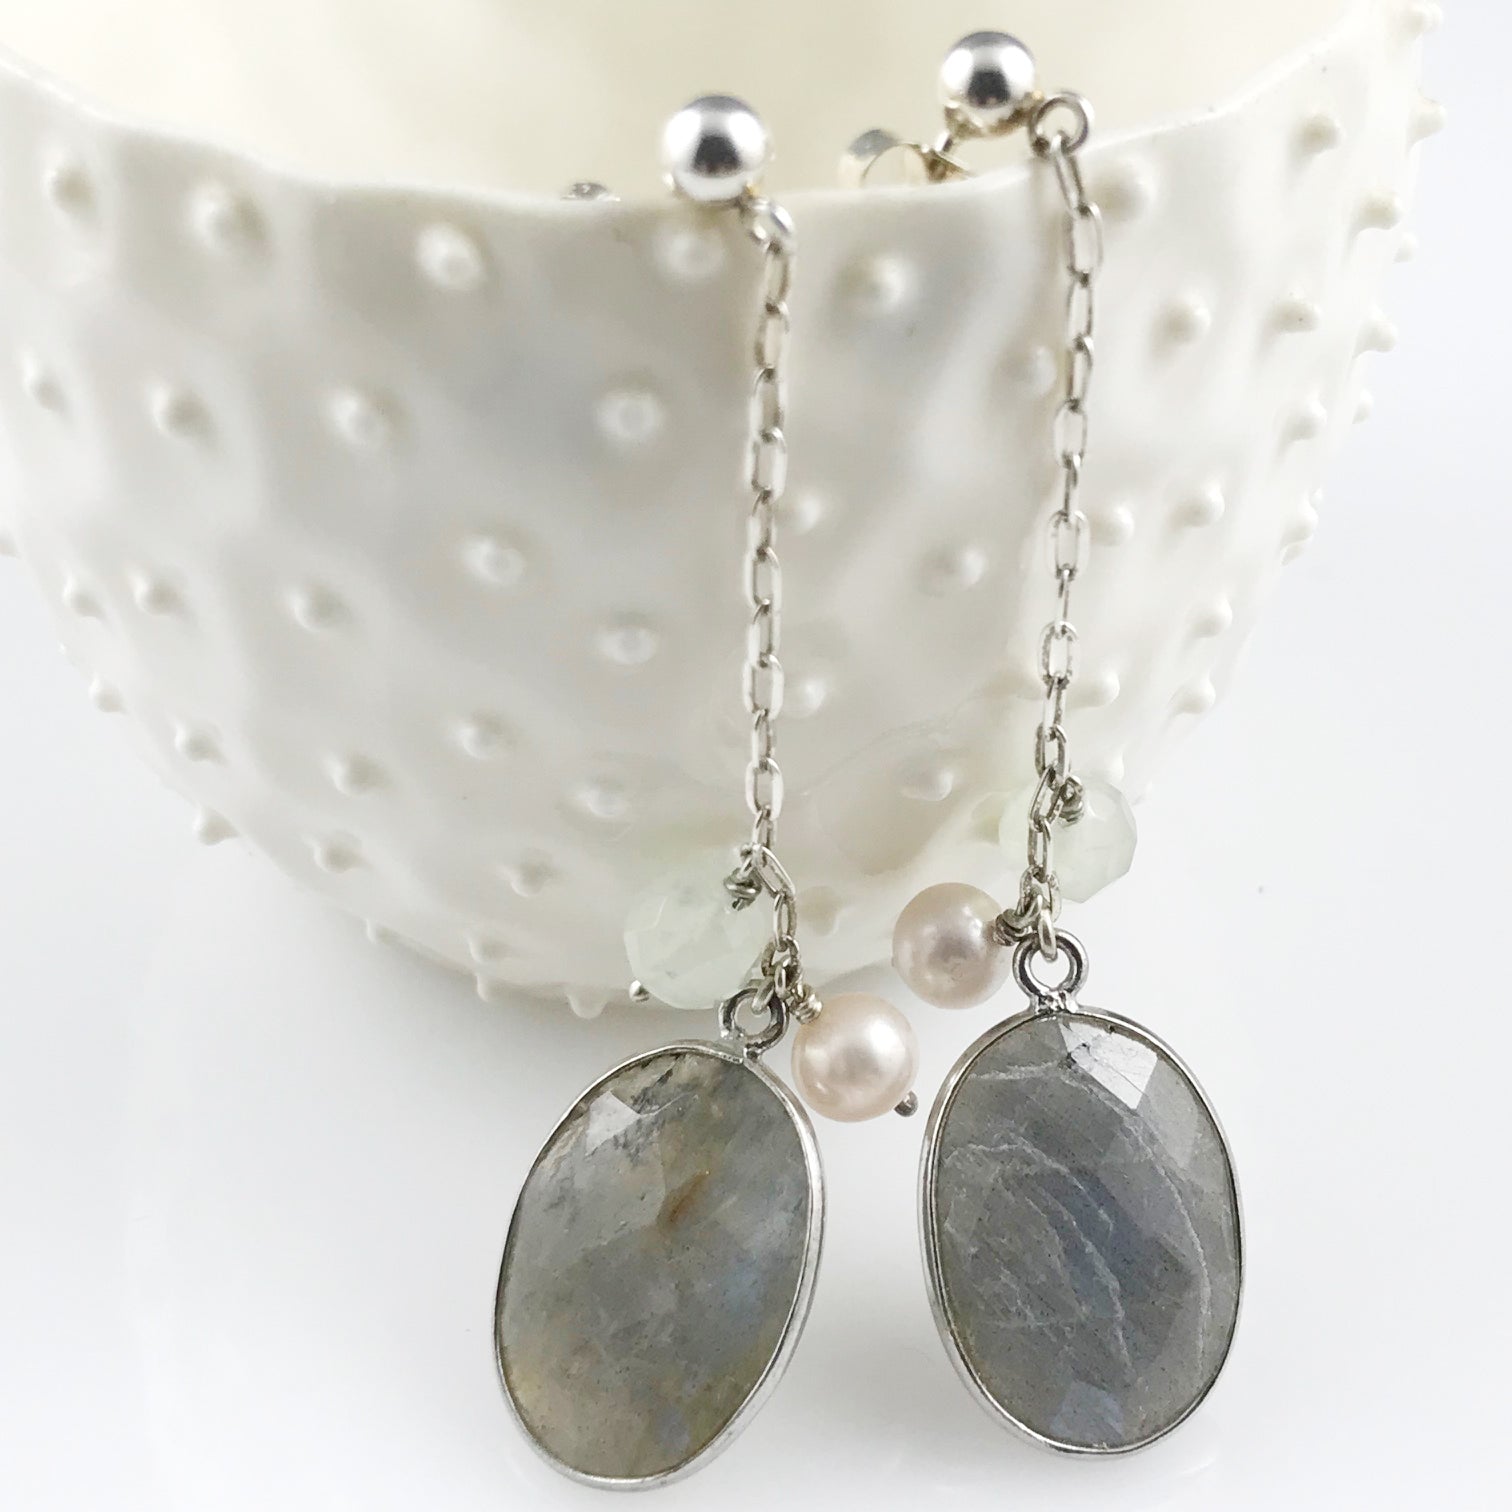 Silver earrings with labradorite, pearl and green quartz drop